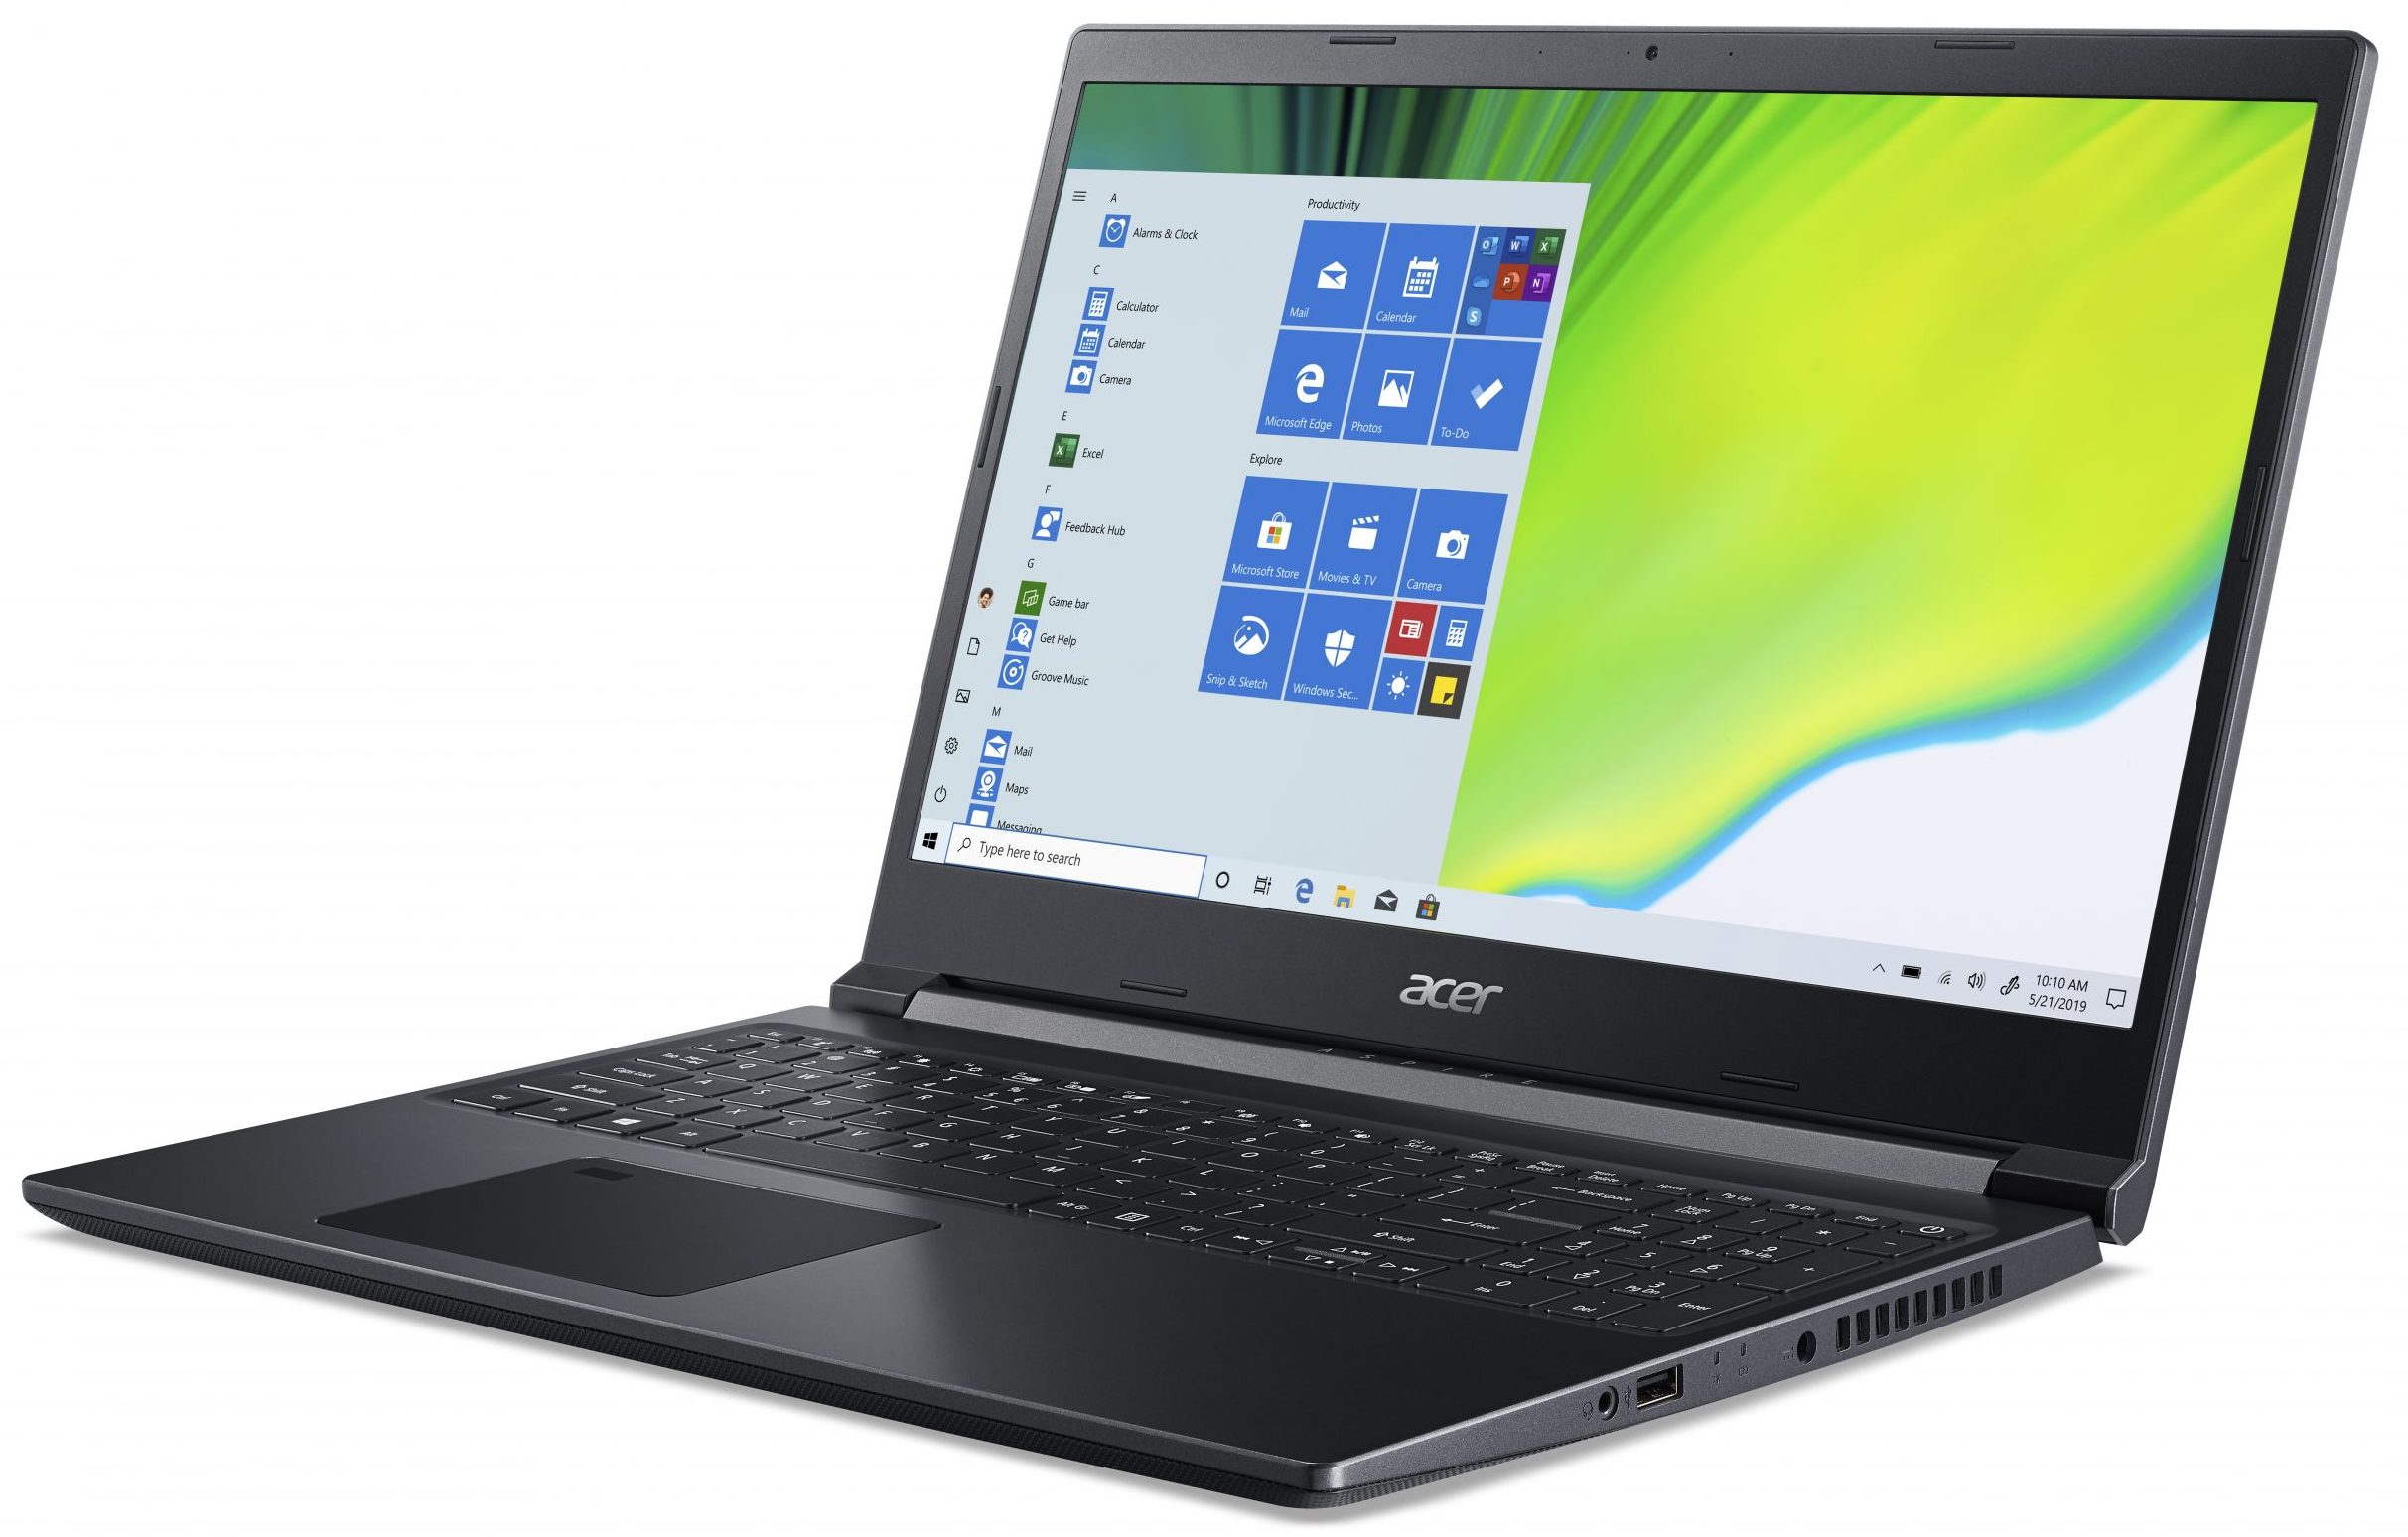 Acer Aspire 7 (A715-75 / A715-75G) - Specs, Tests, and Prices 